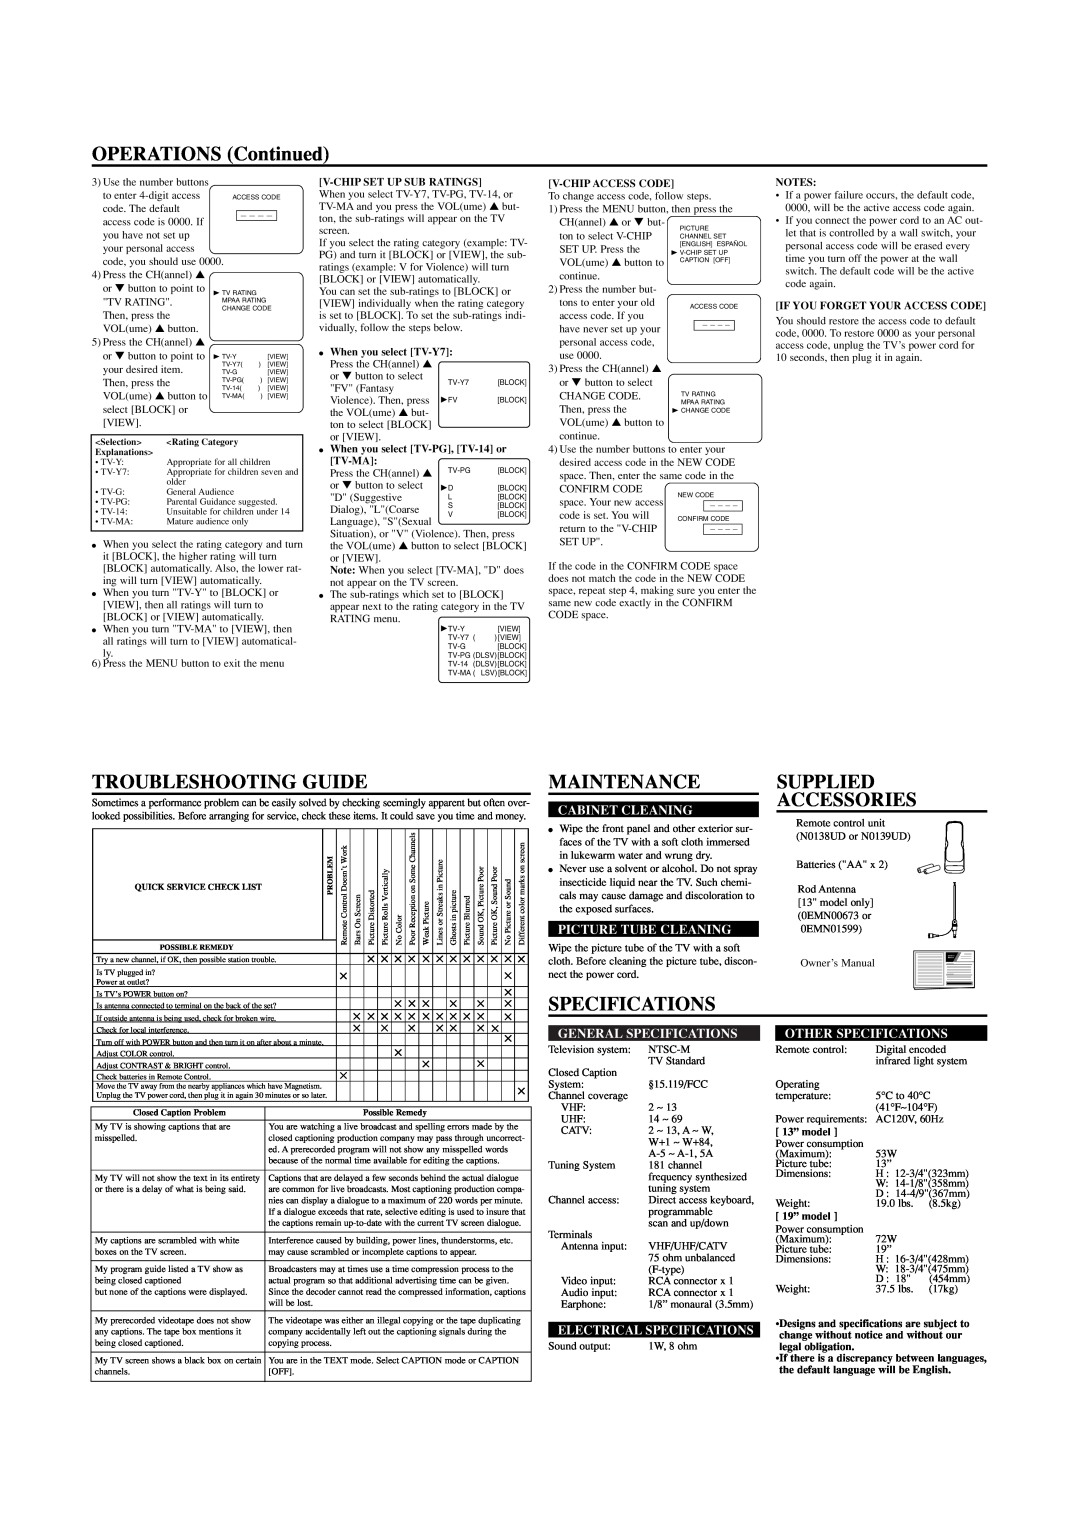 Sylvania SRT2313, SRT2319 OPERATIONS Continued, Troubleshooting Guide, Maintenance, Supplied Accessories, Specifications 